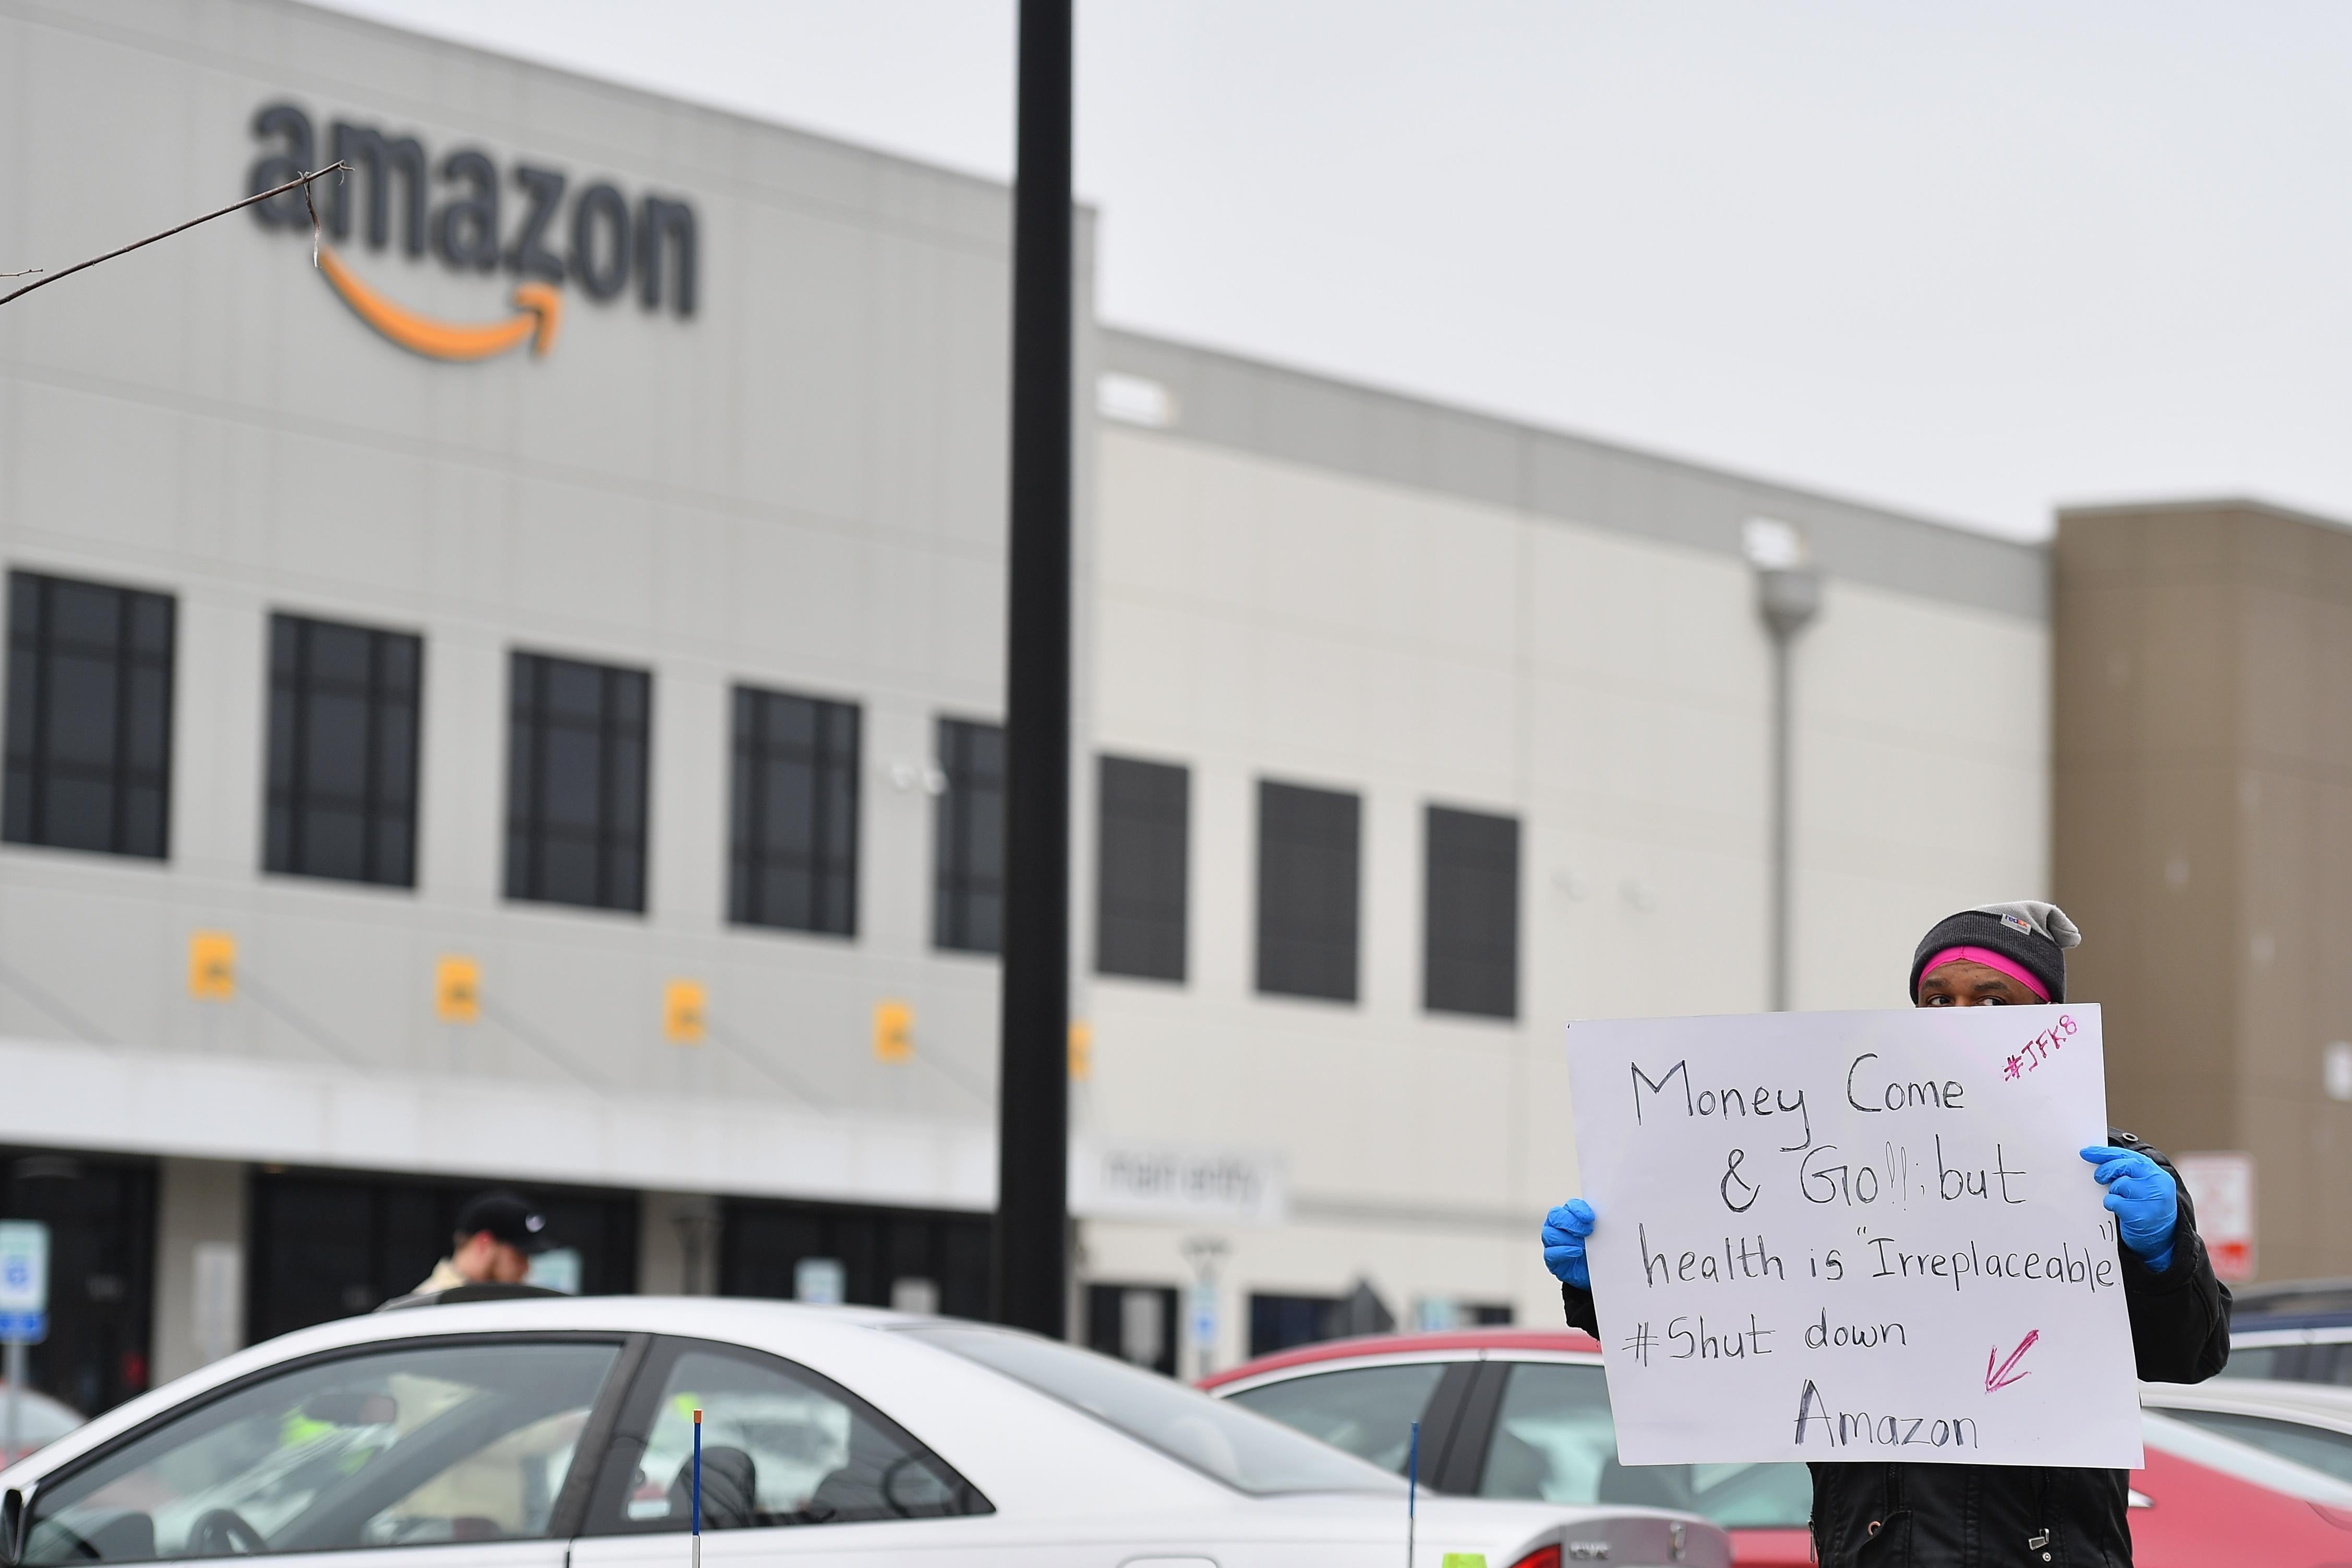 A protester stands in front of an Amazon facility holding a sign that reads "Money come and go but health is irreplaceable #Shut down Amazon"